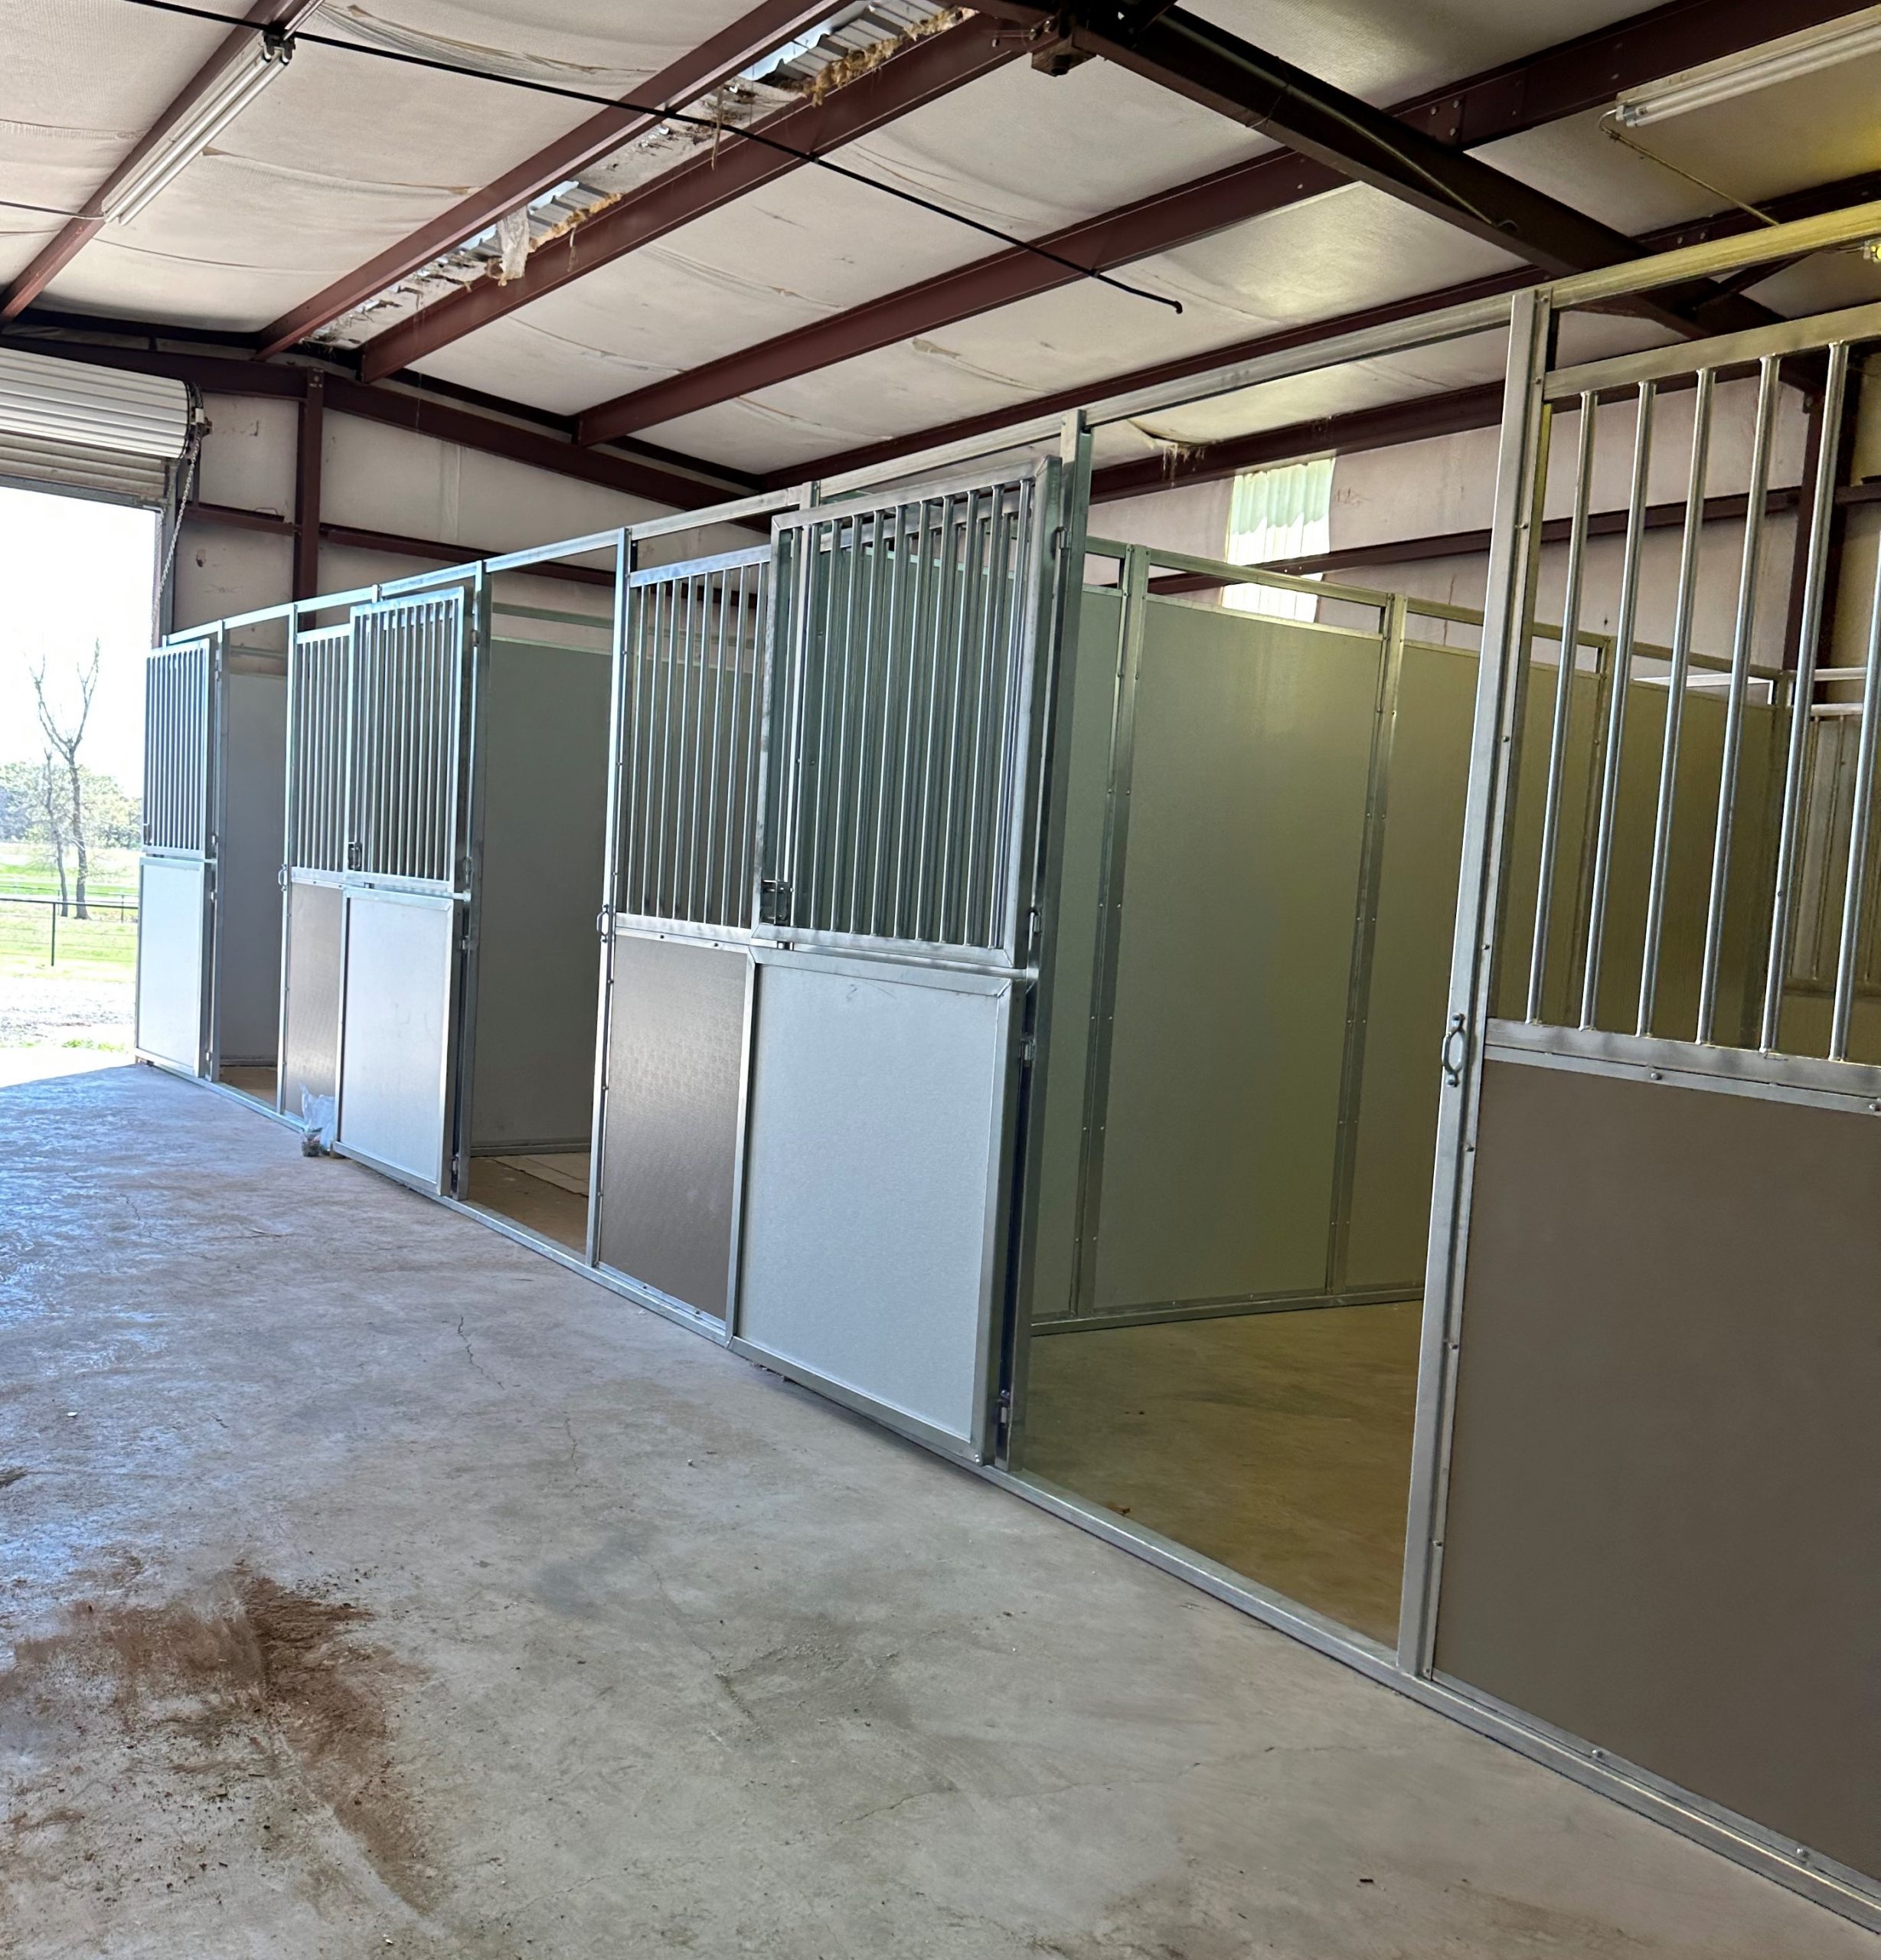 Care for your horses during the winters – Setting up the right kind of barn